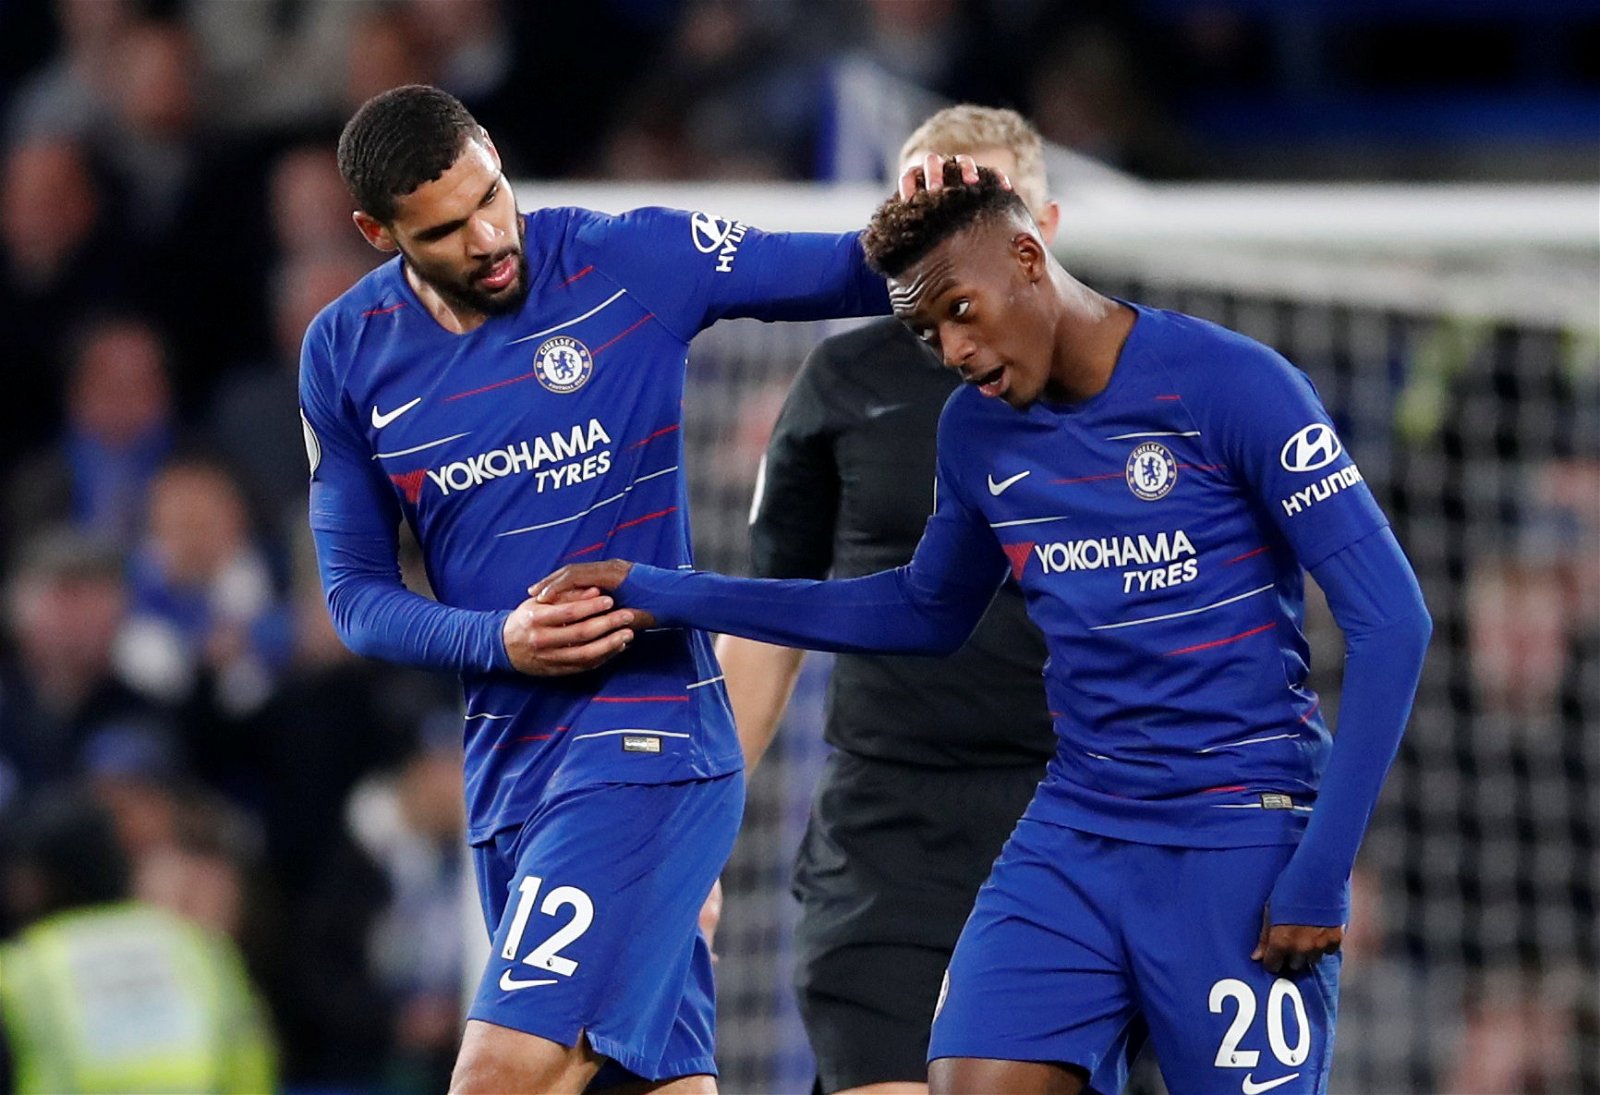 Chelsea youngster close to signing new contract